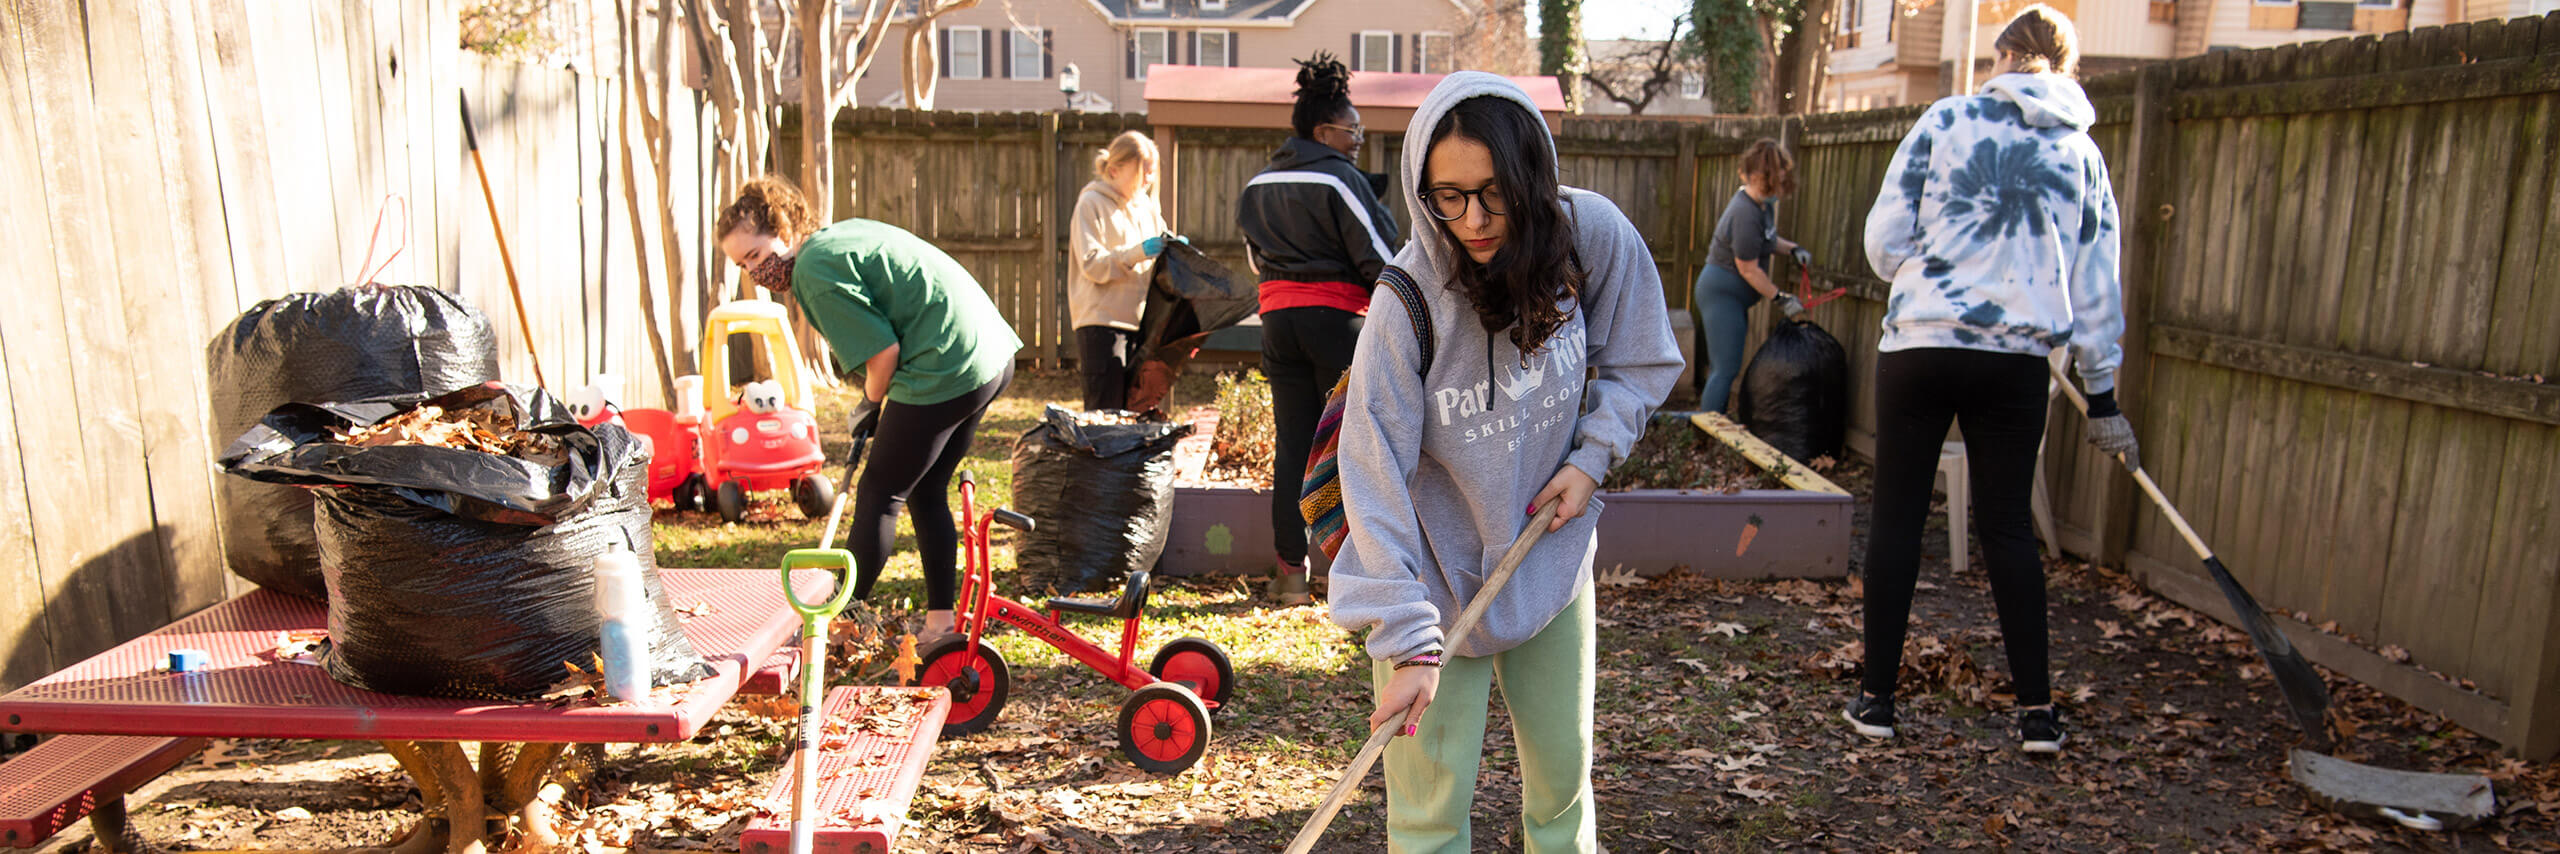 A group of student volunteers are taking part in community service.